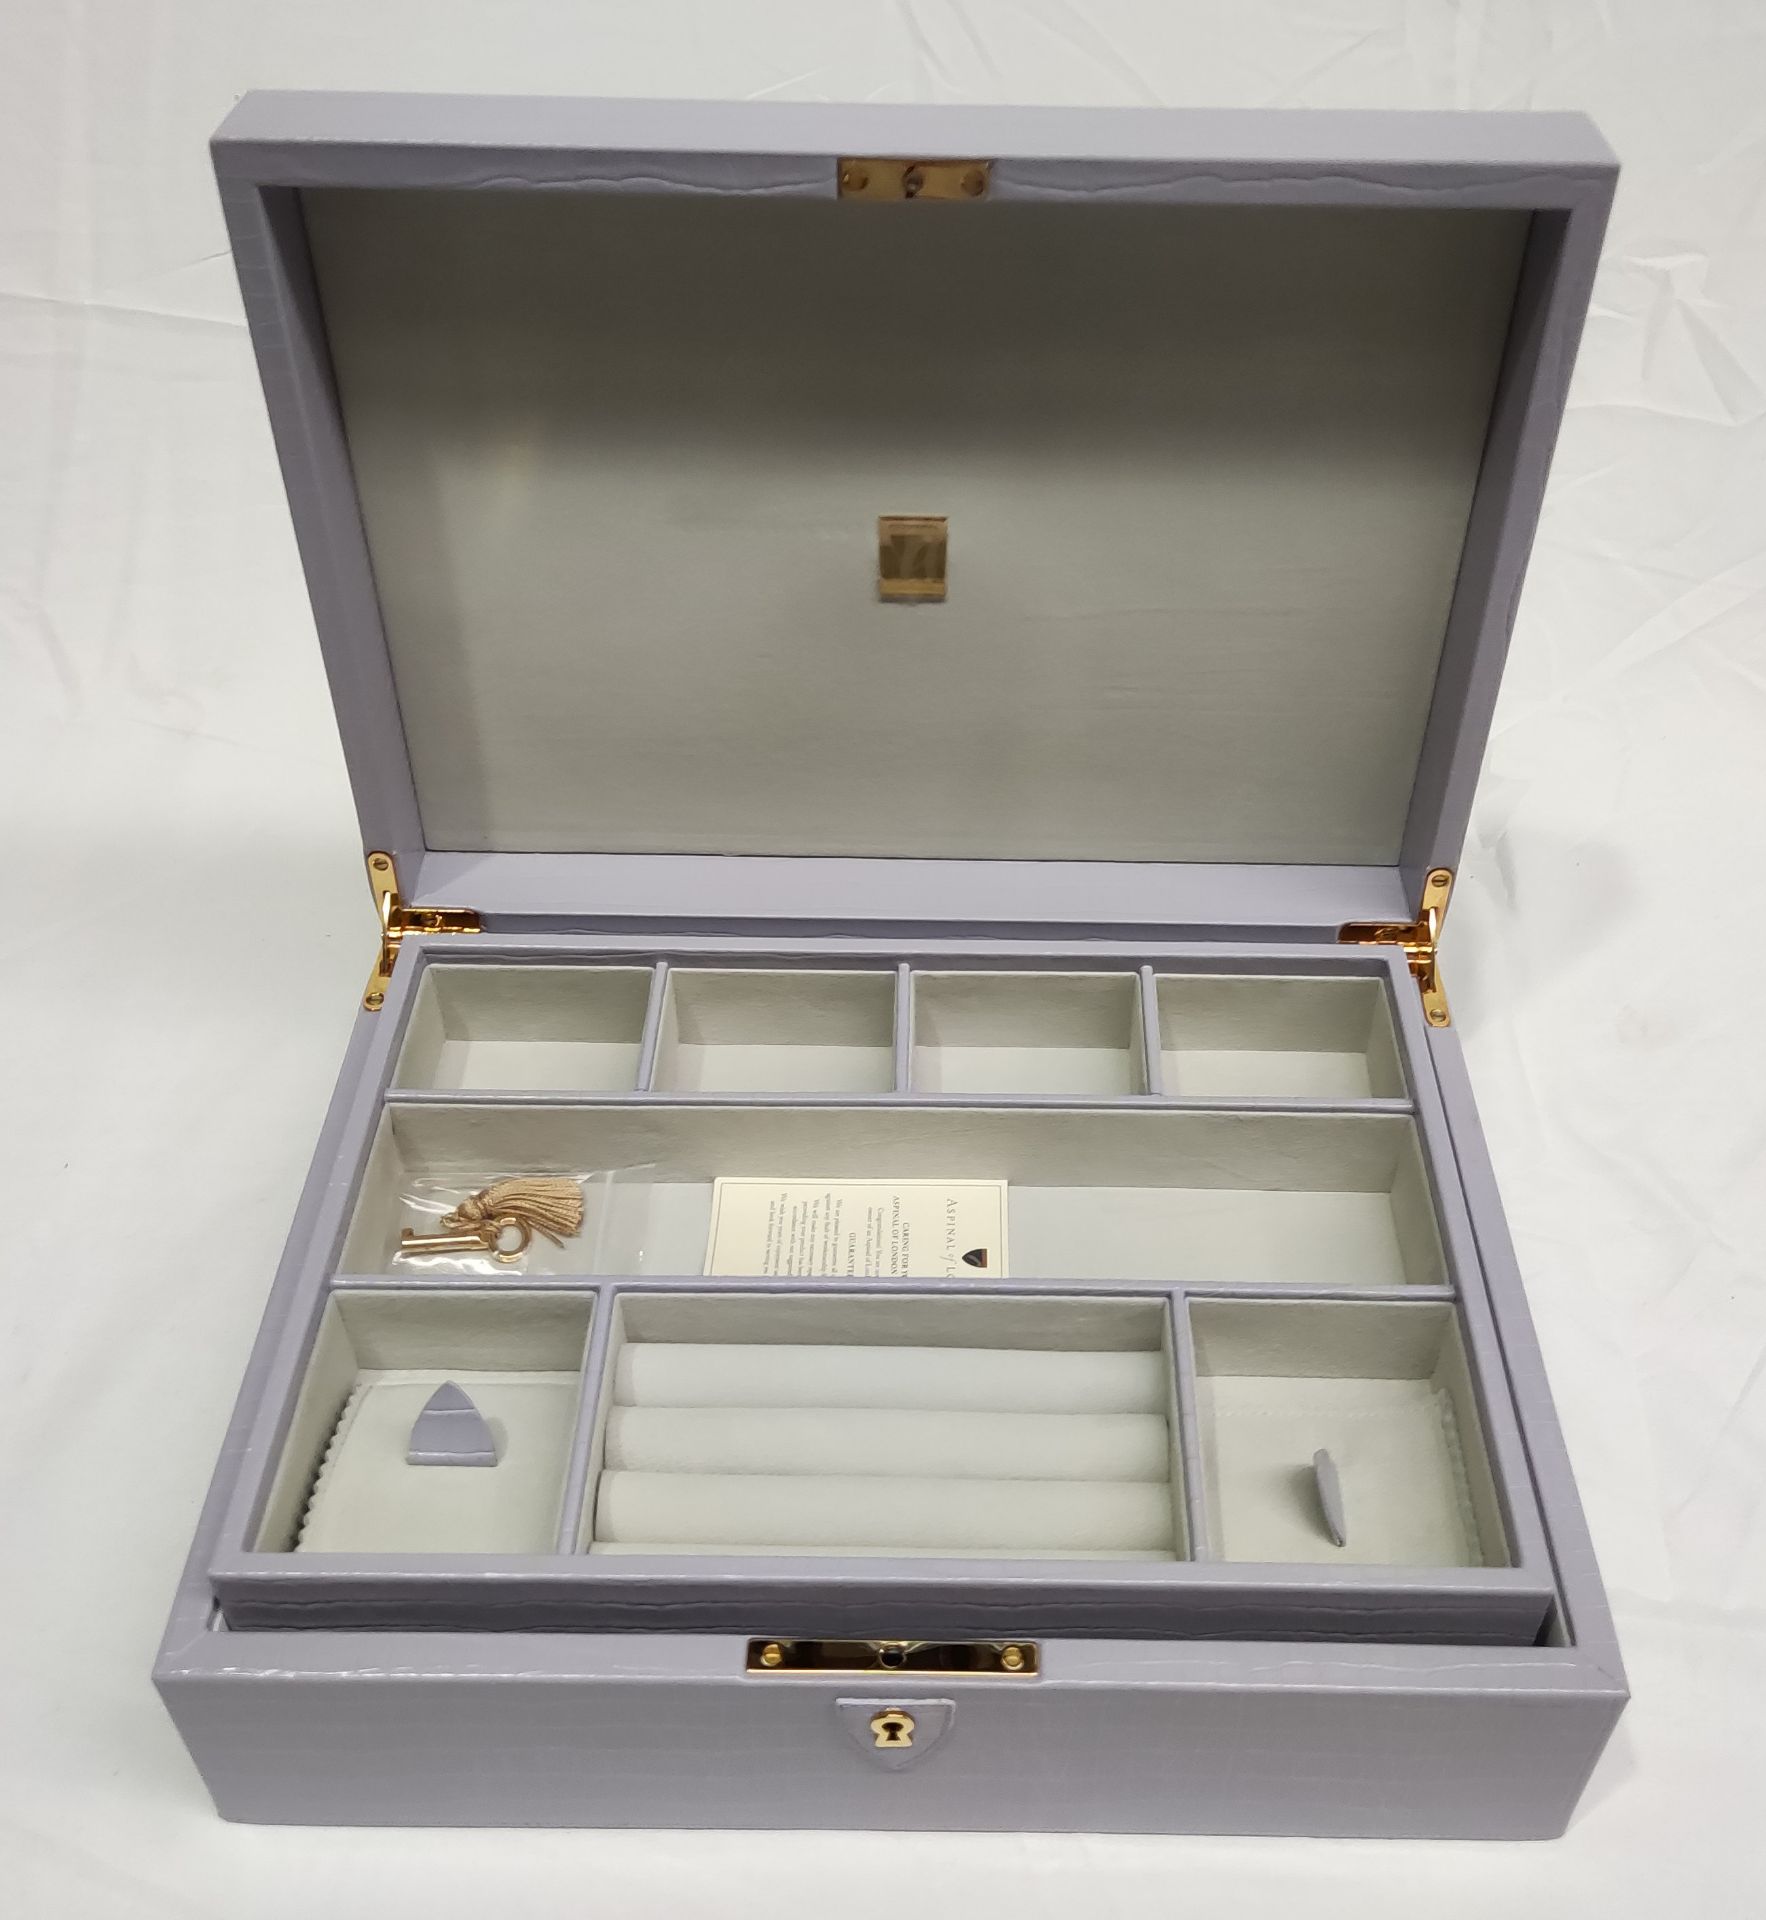 1 x ASPINAL OF LONDON Grand Luxe Jewellery Case In Deep Shine English Lavender Croc - Original - Image 15 of 34